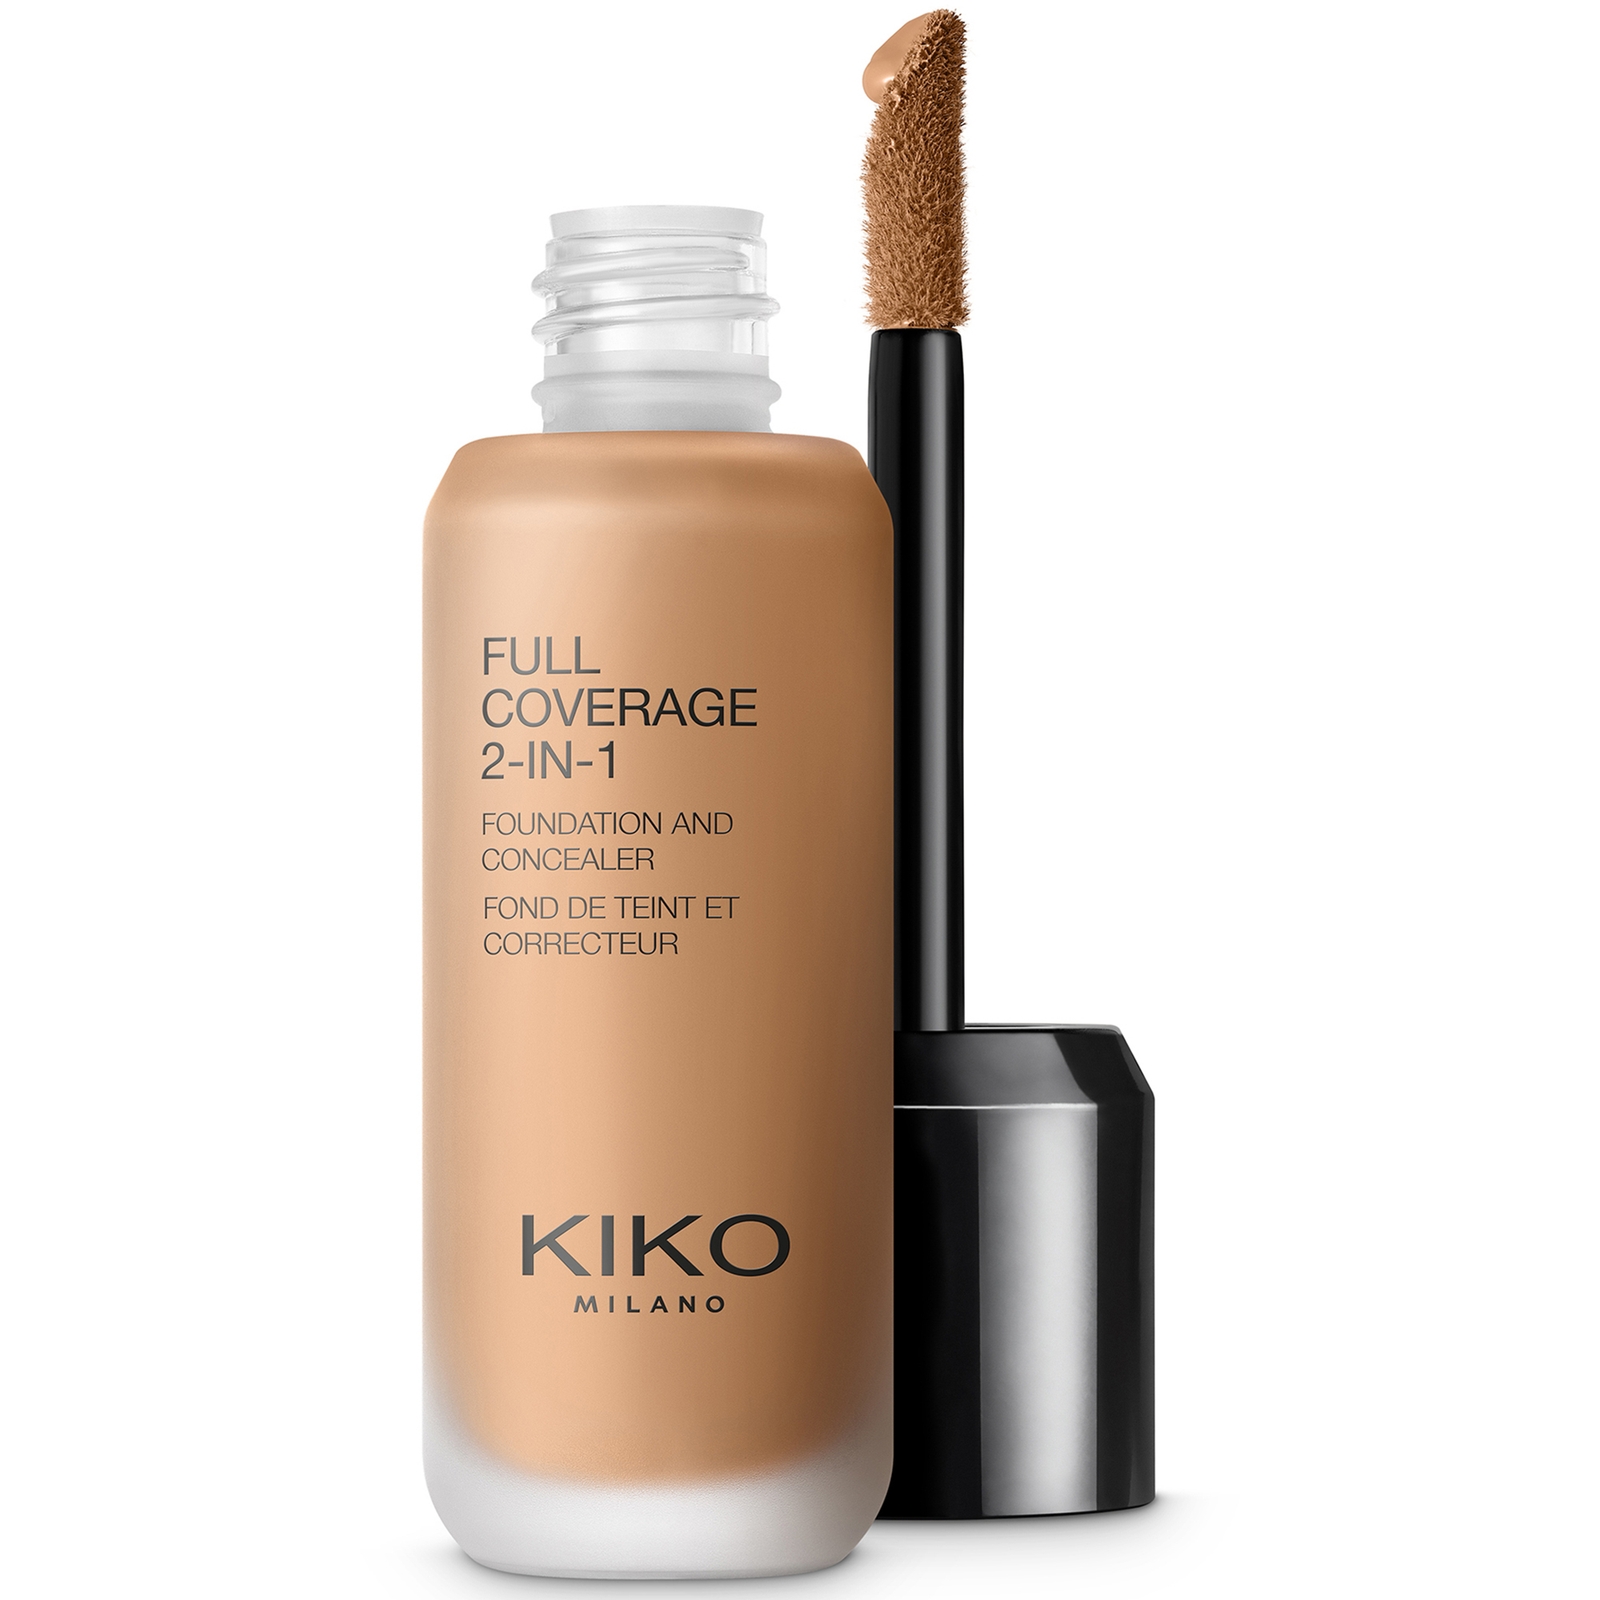 KIKO Milano Full Coverage 2-in-1 Foundation and Concealer 25ml (Various Shades) - 95 Neutral Rose